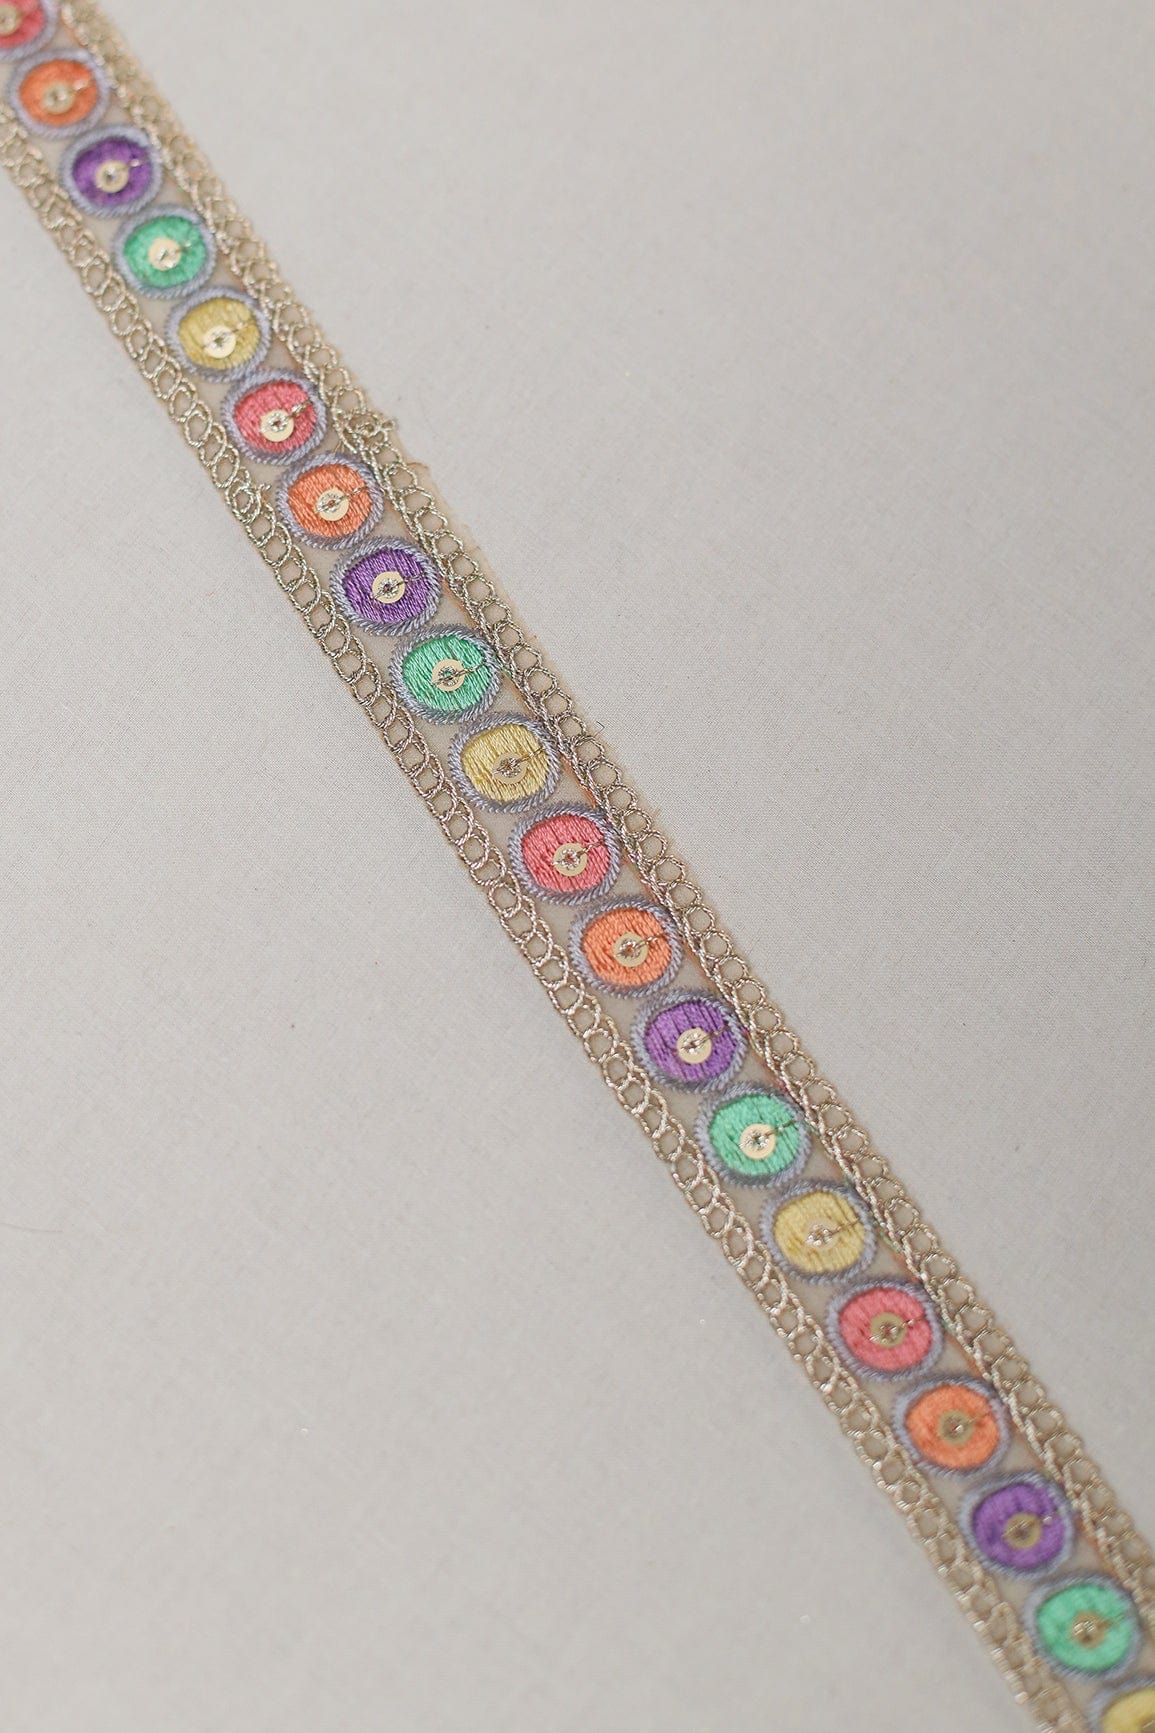 doeraa Laces Geometric Multi Color Thread Work With Gold Sequins Embroidered Lace (9 Meters)